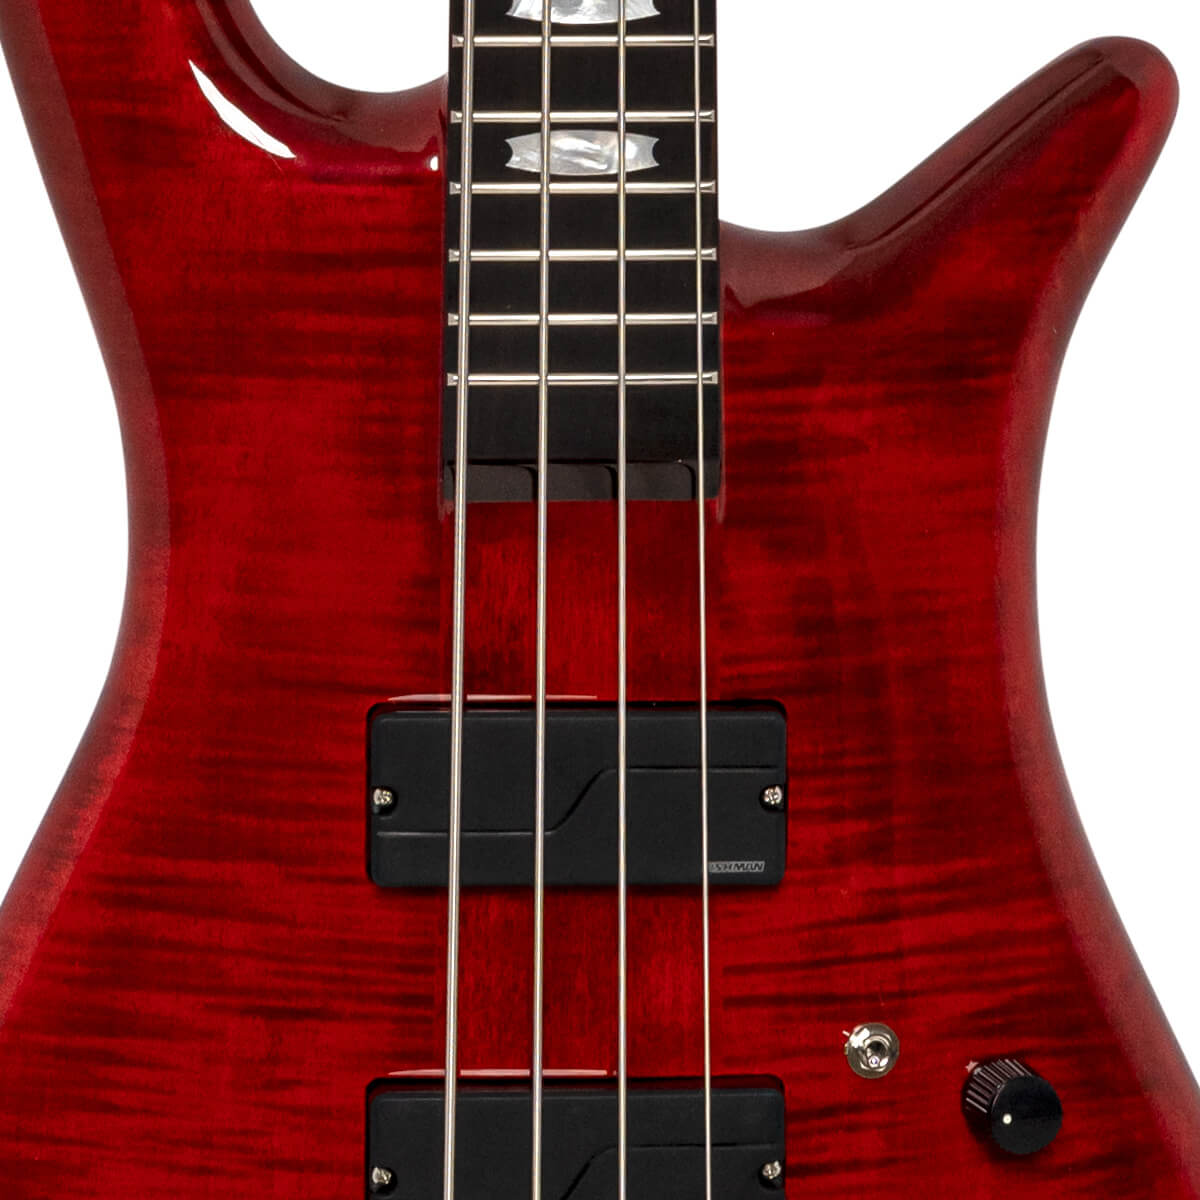 Spector Rudy Sarzo Lt4 Euro Signature Rw - Scarlett Red Gloss - Basse Électrique Solid Body - Variation 1